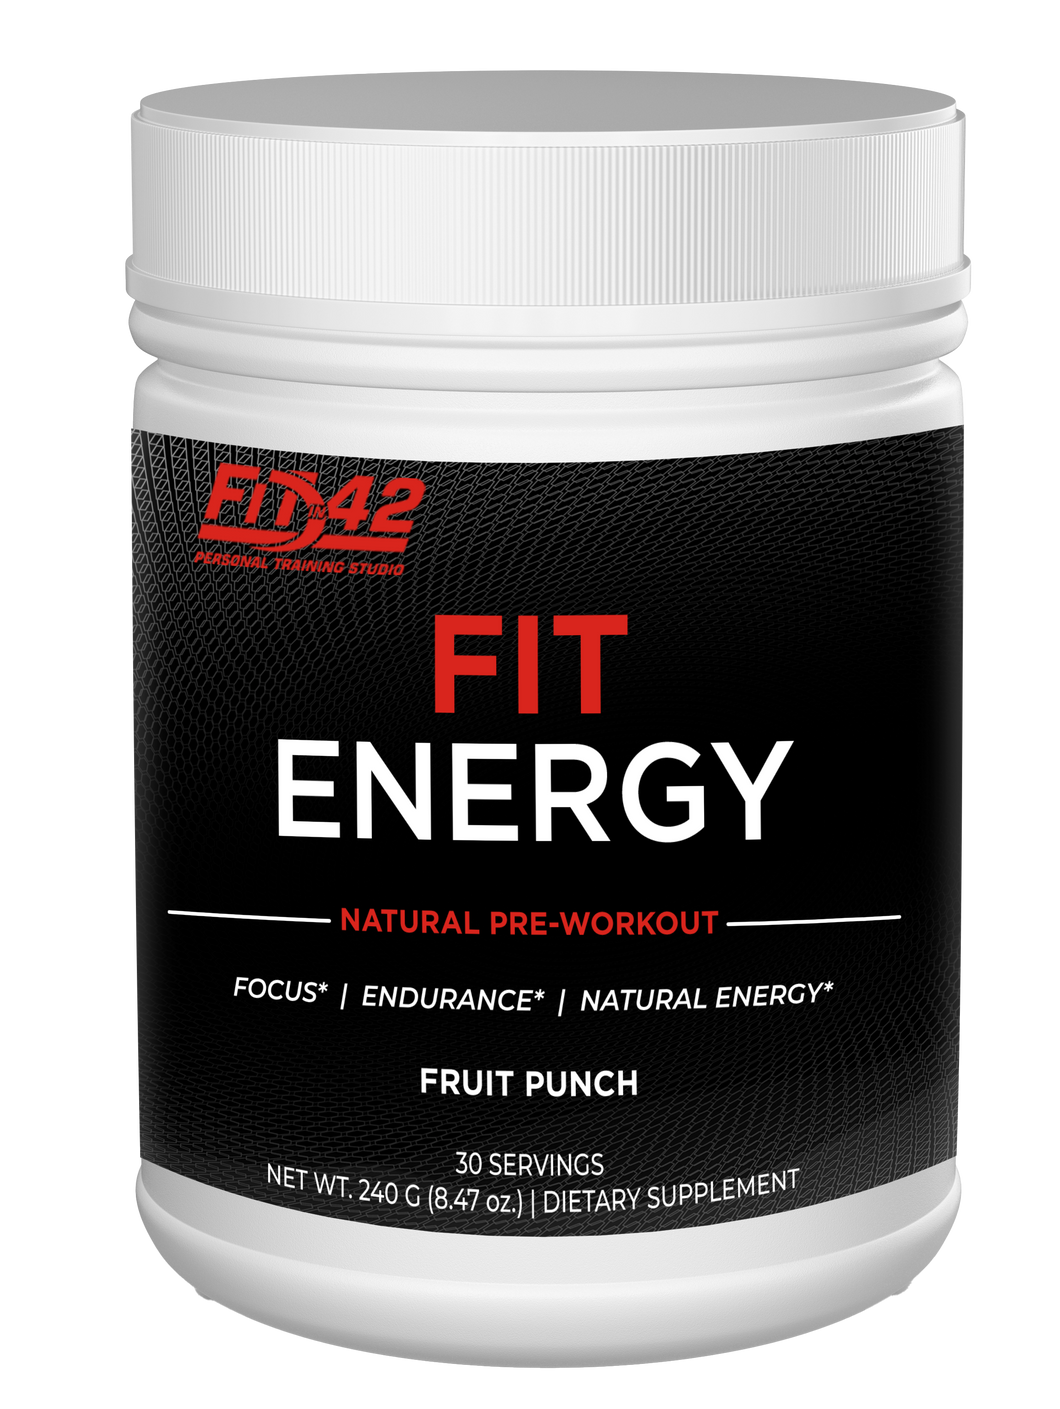 Fit Energy Natural Pre-Workout